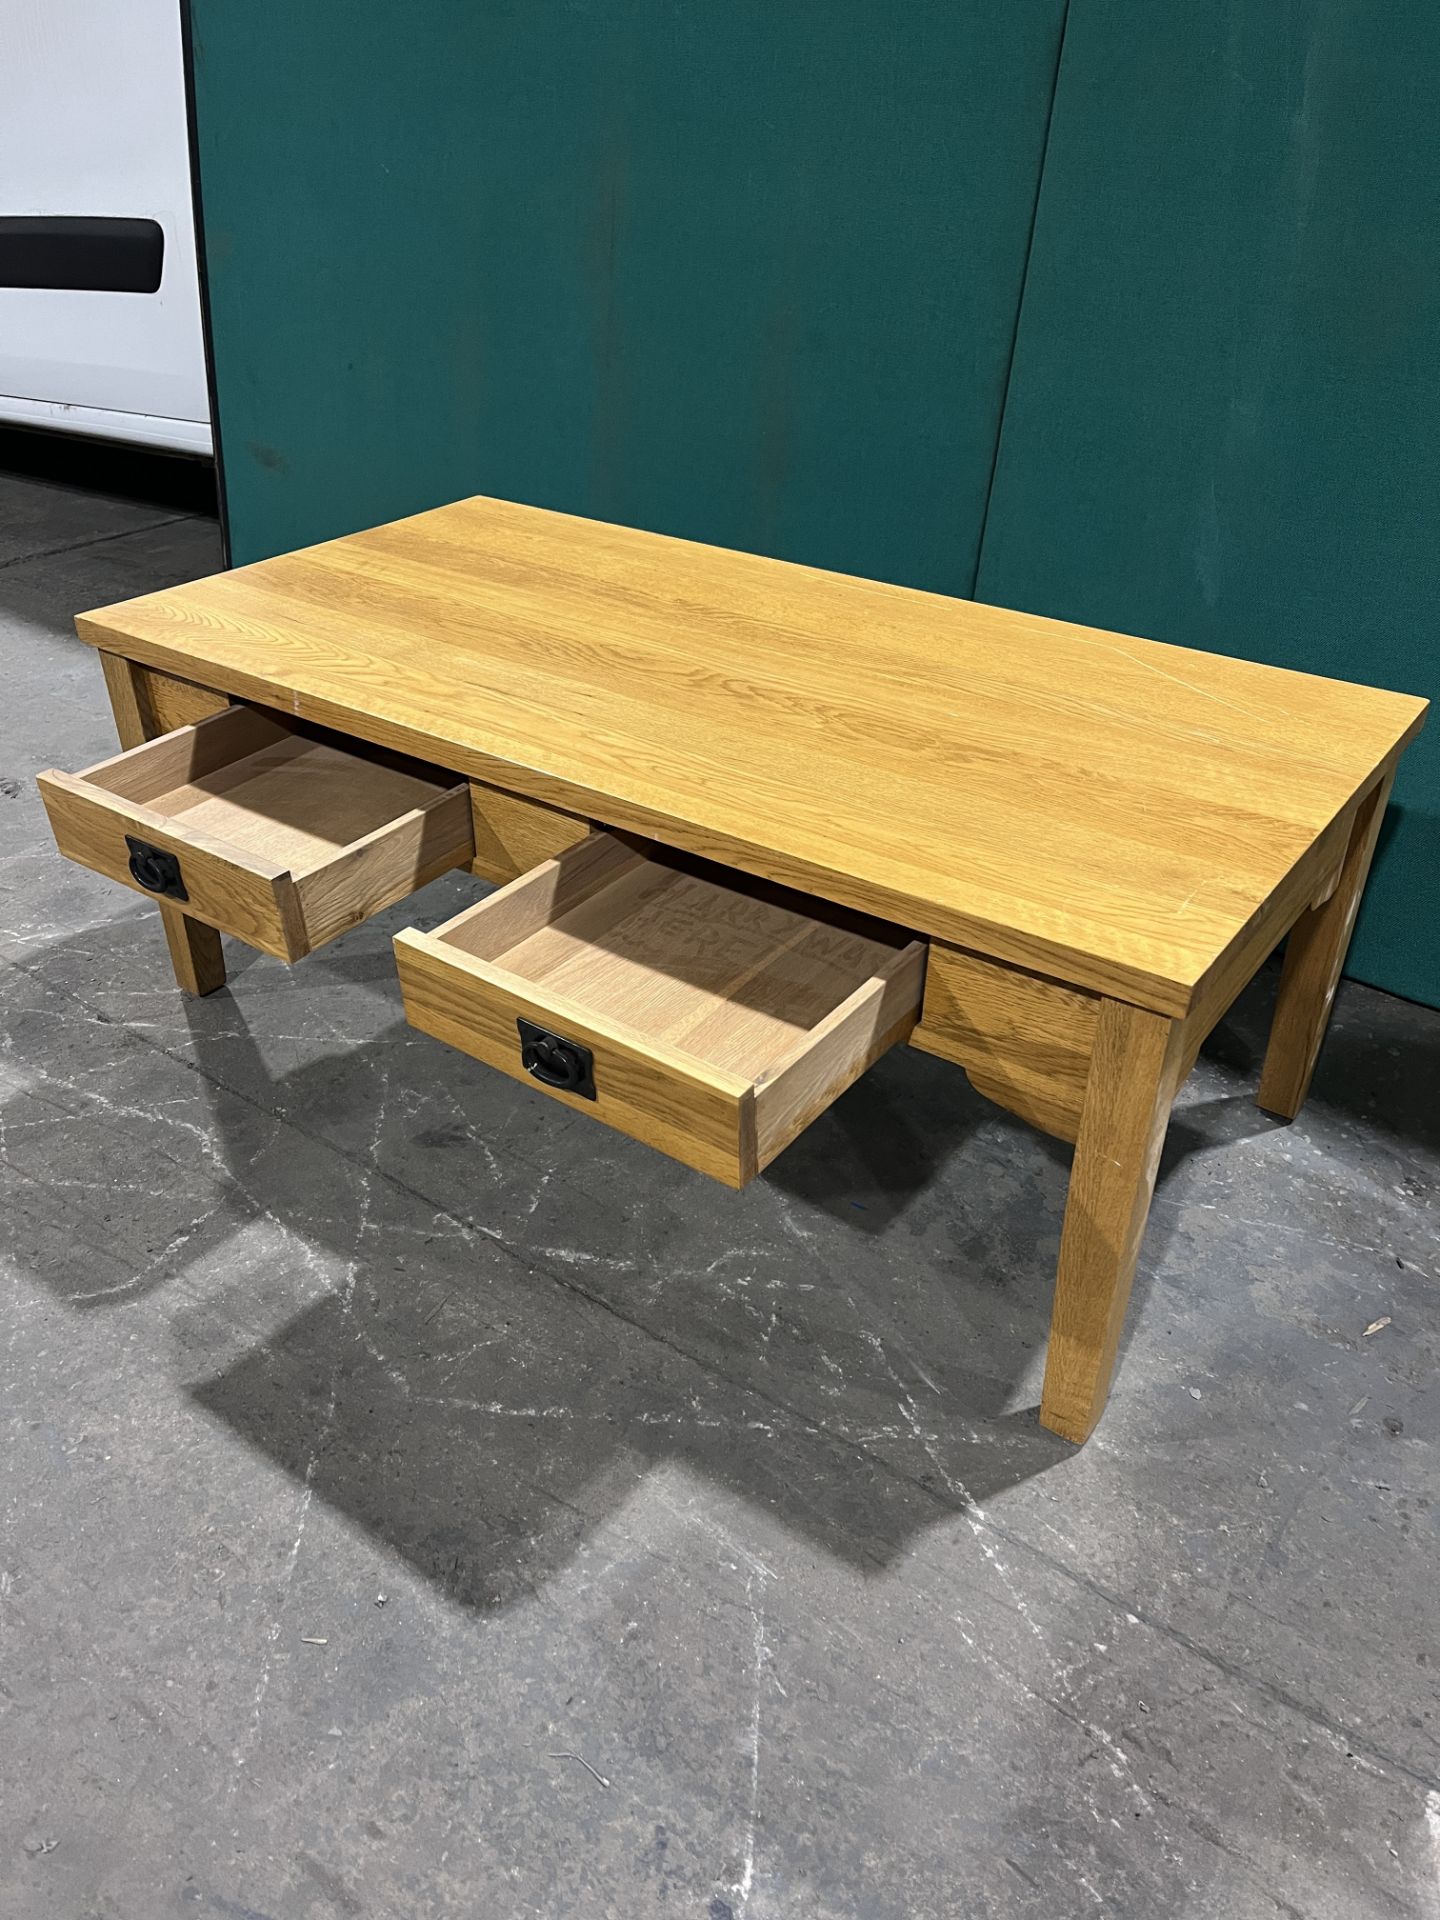 Oak Coffee Table w 2 Drawers - Image 4 of 6